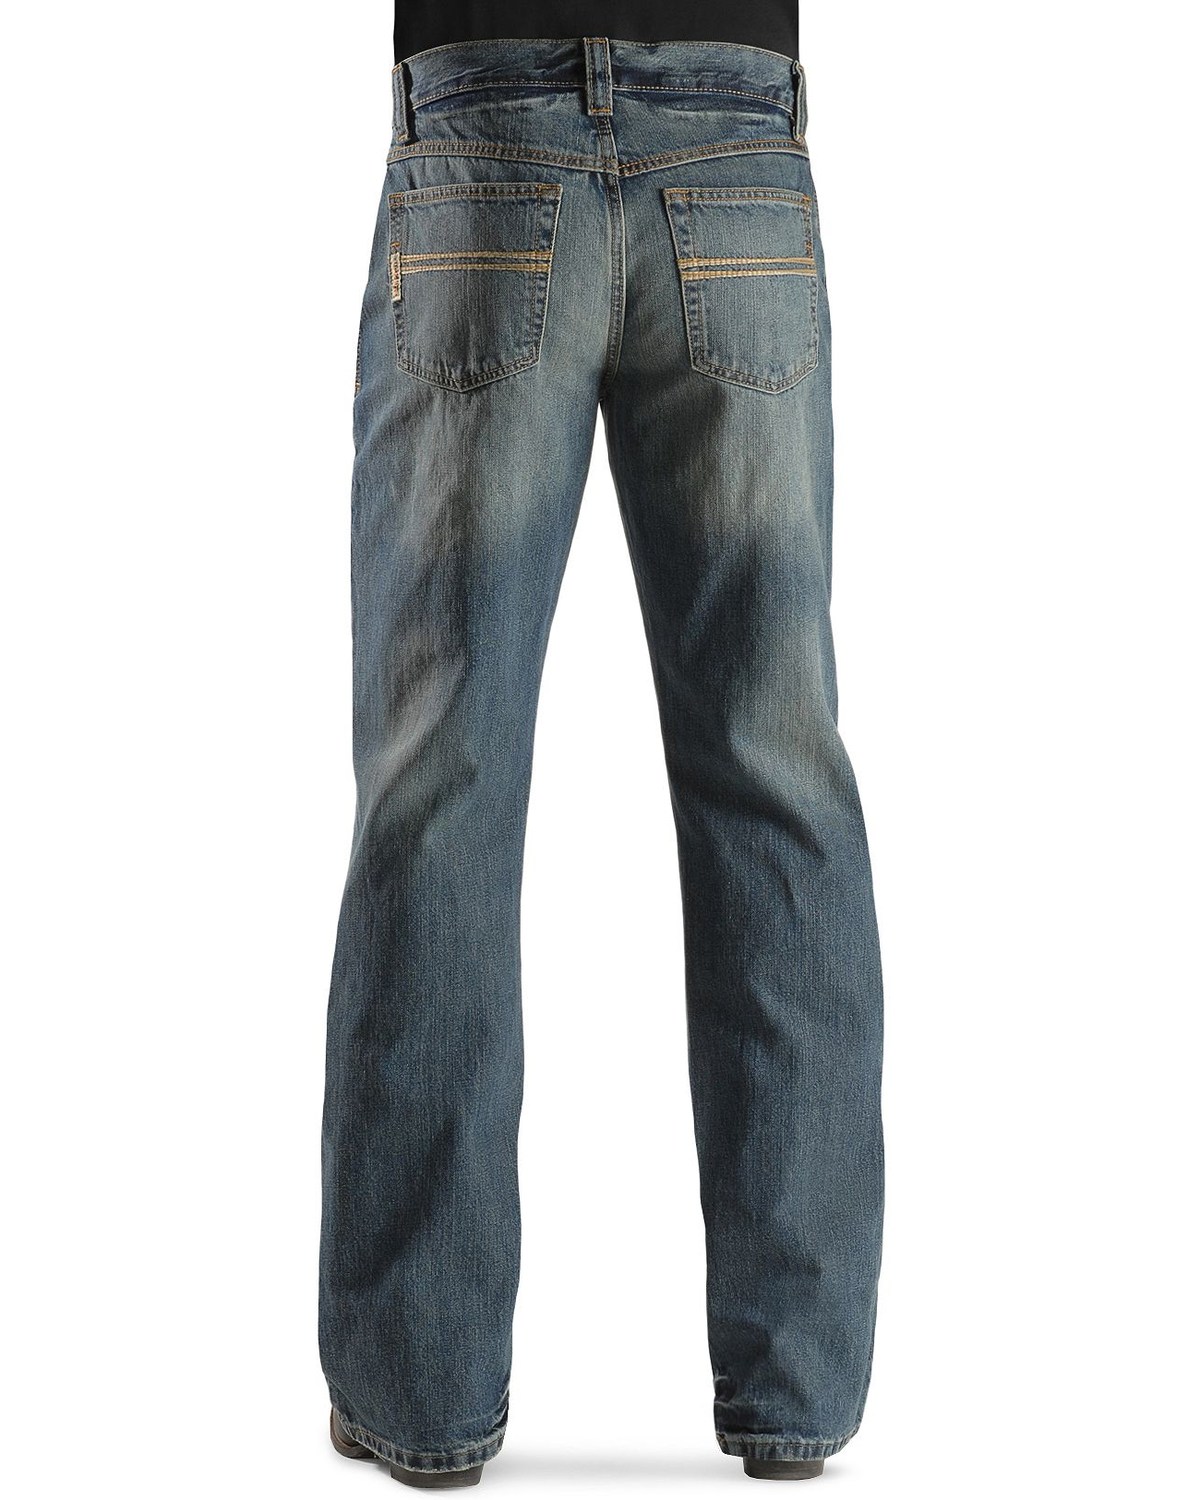 Cinch Jeans - Carter Relaxed Fit